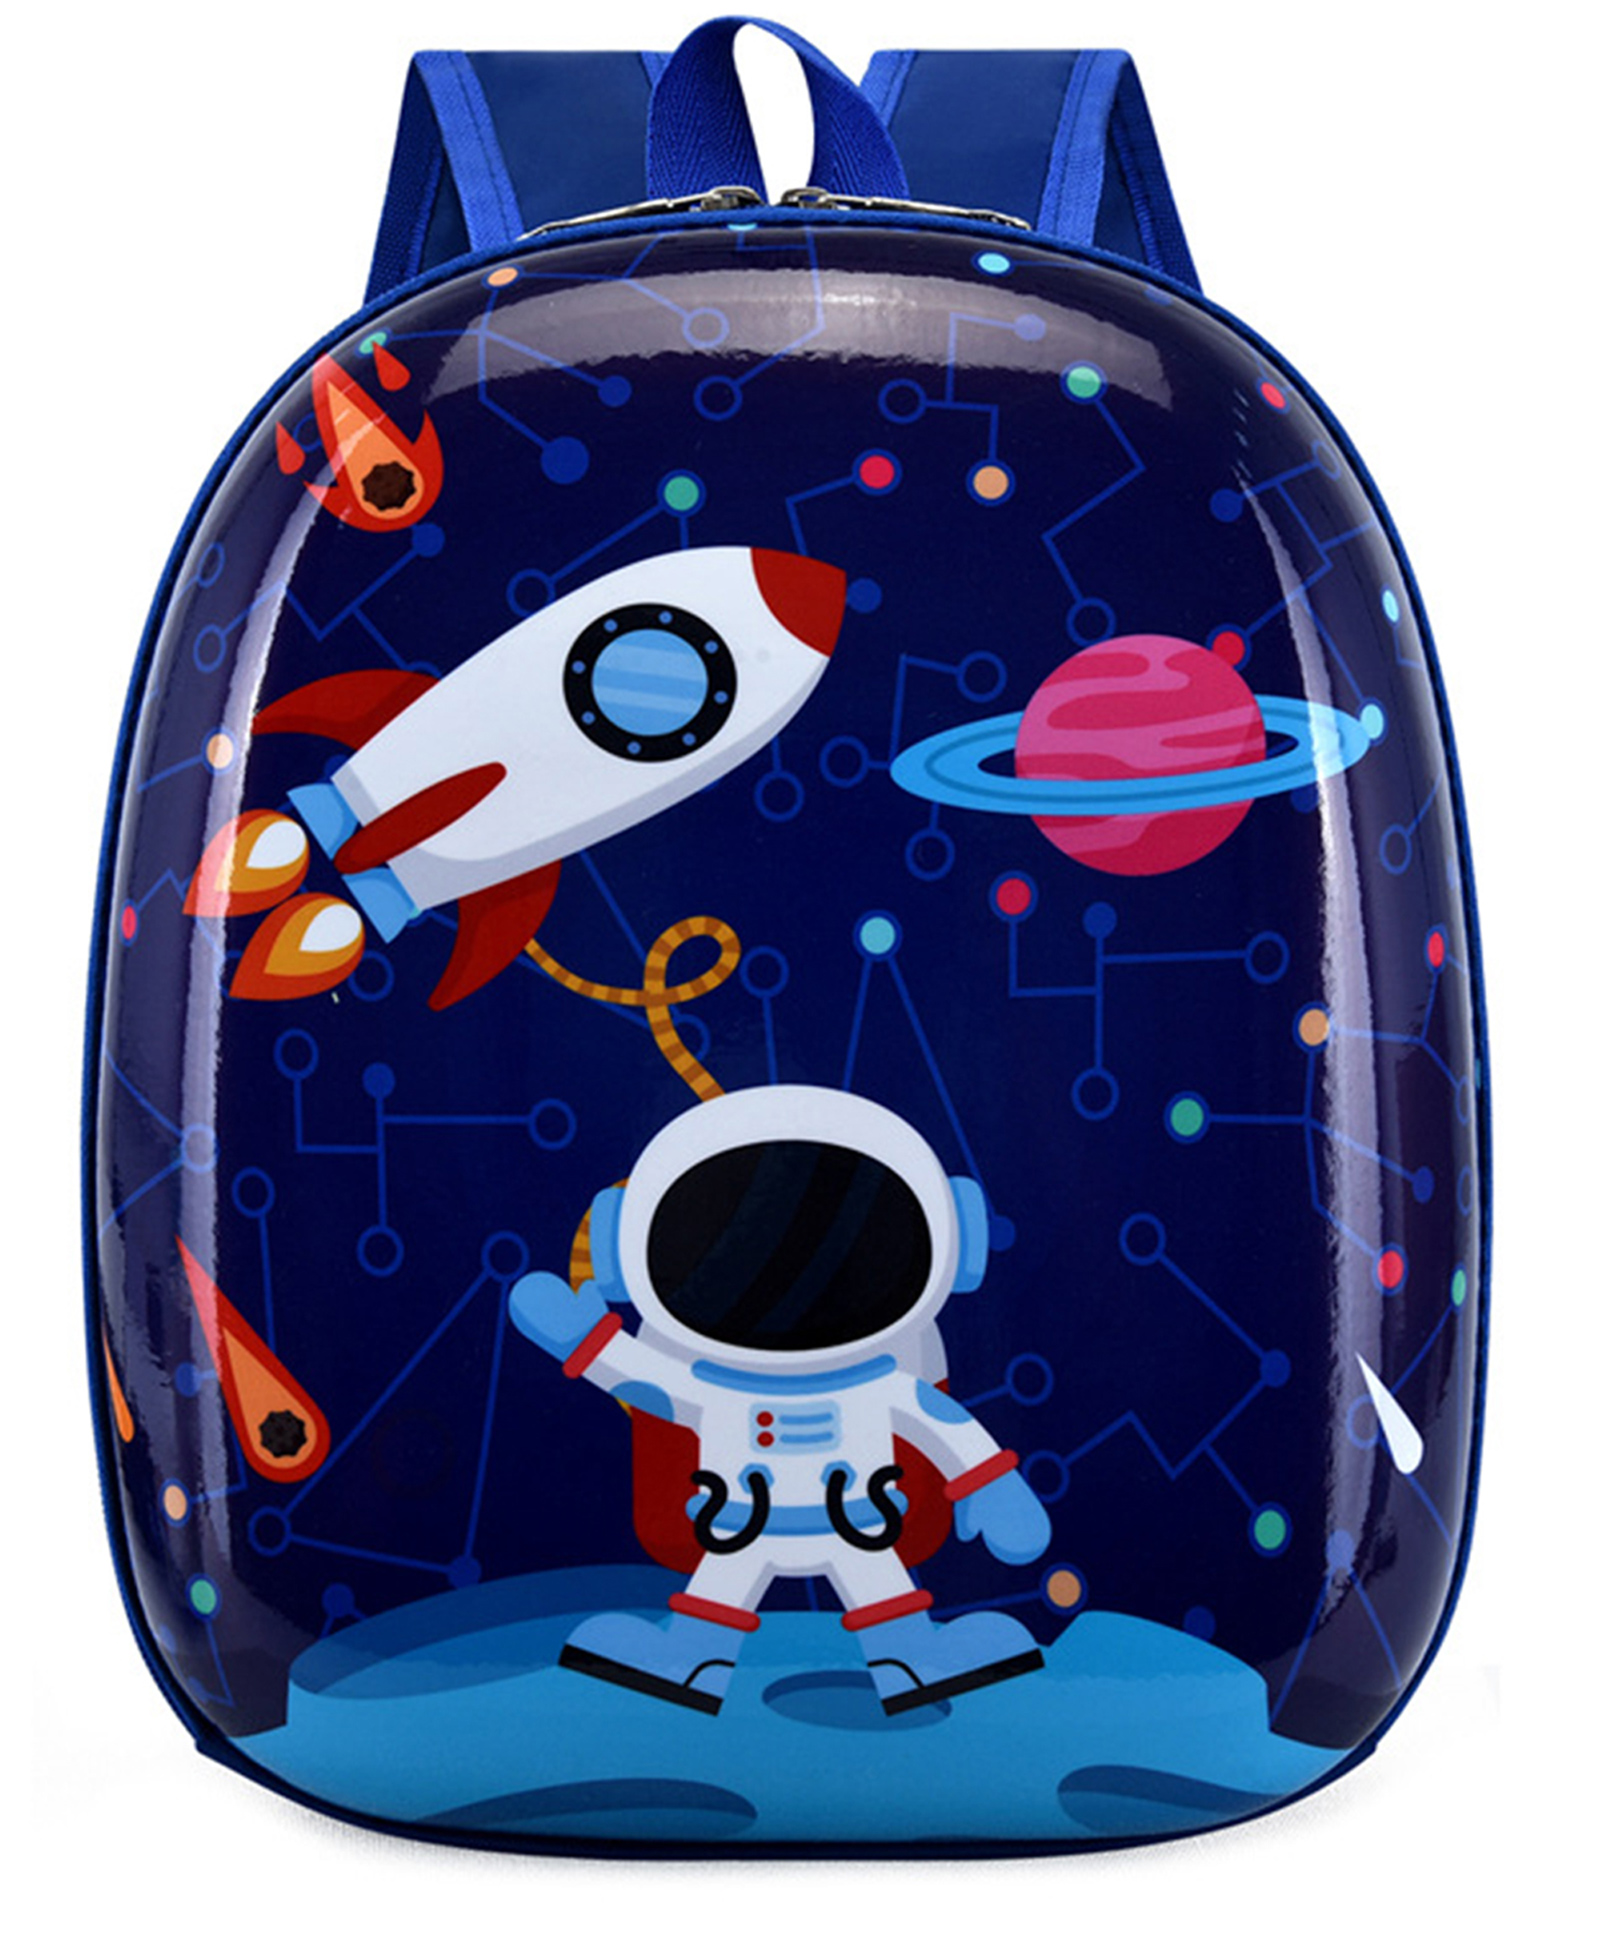 SYGA Children's School Bag Cartoon Backpack Space Theme Blue  Inches  Online in India, Buy at Best Price from  - 11794403